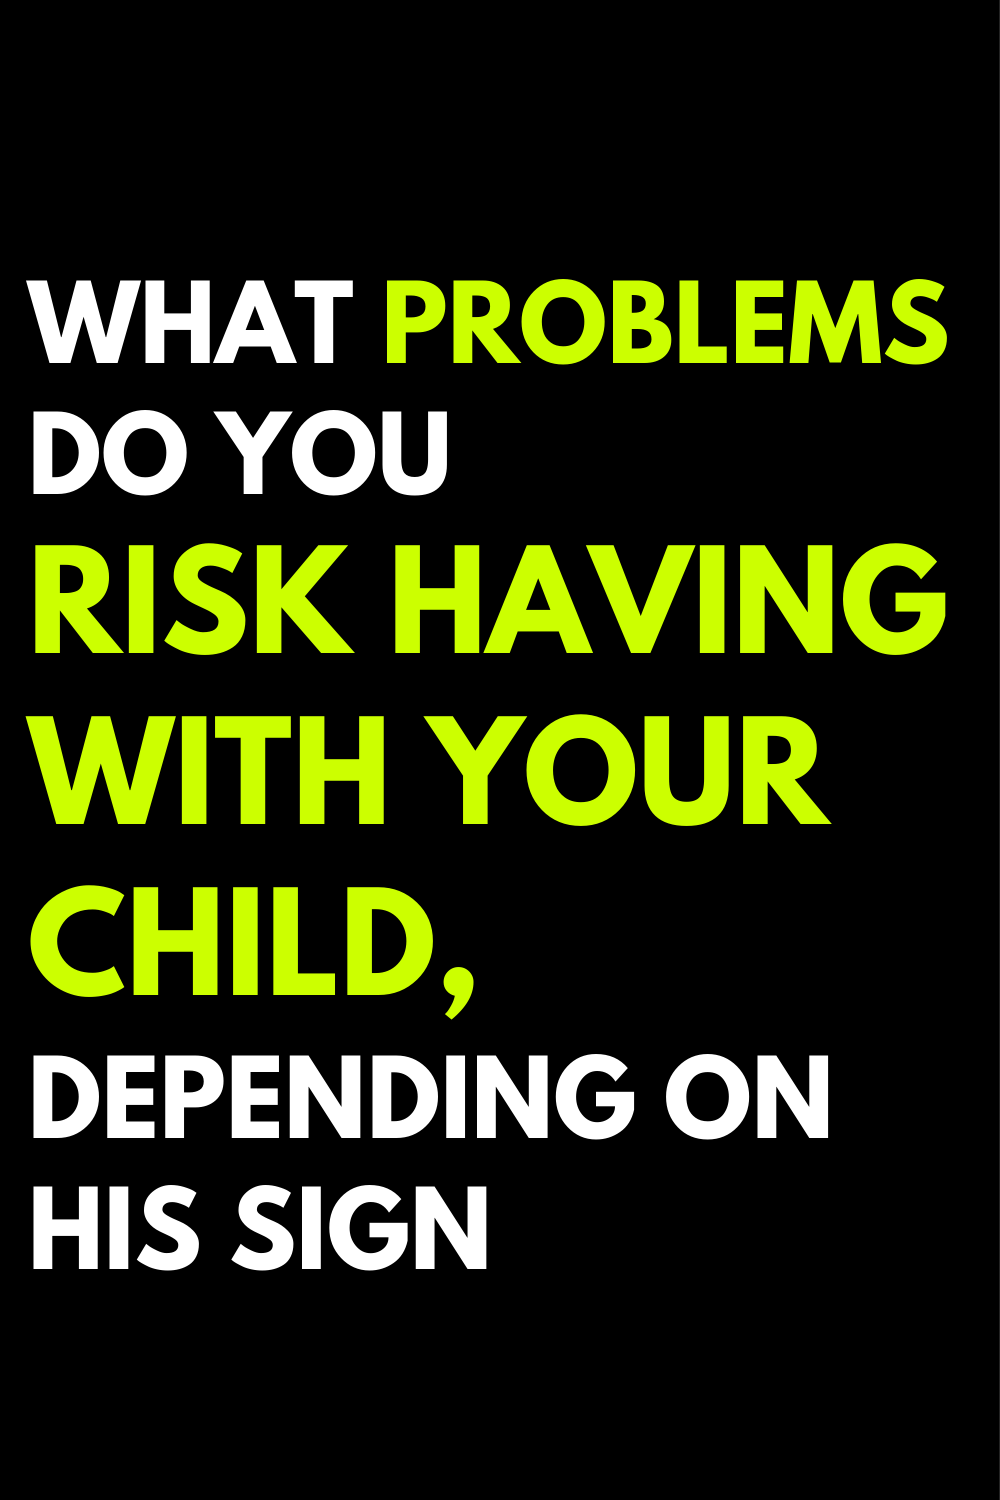 What problems do you risk having with your child, depending on his sign